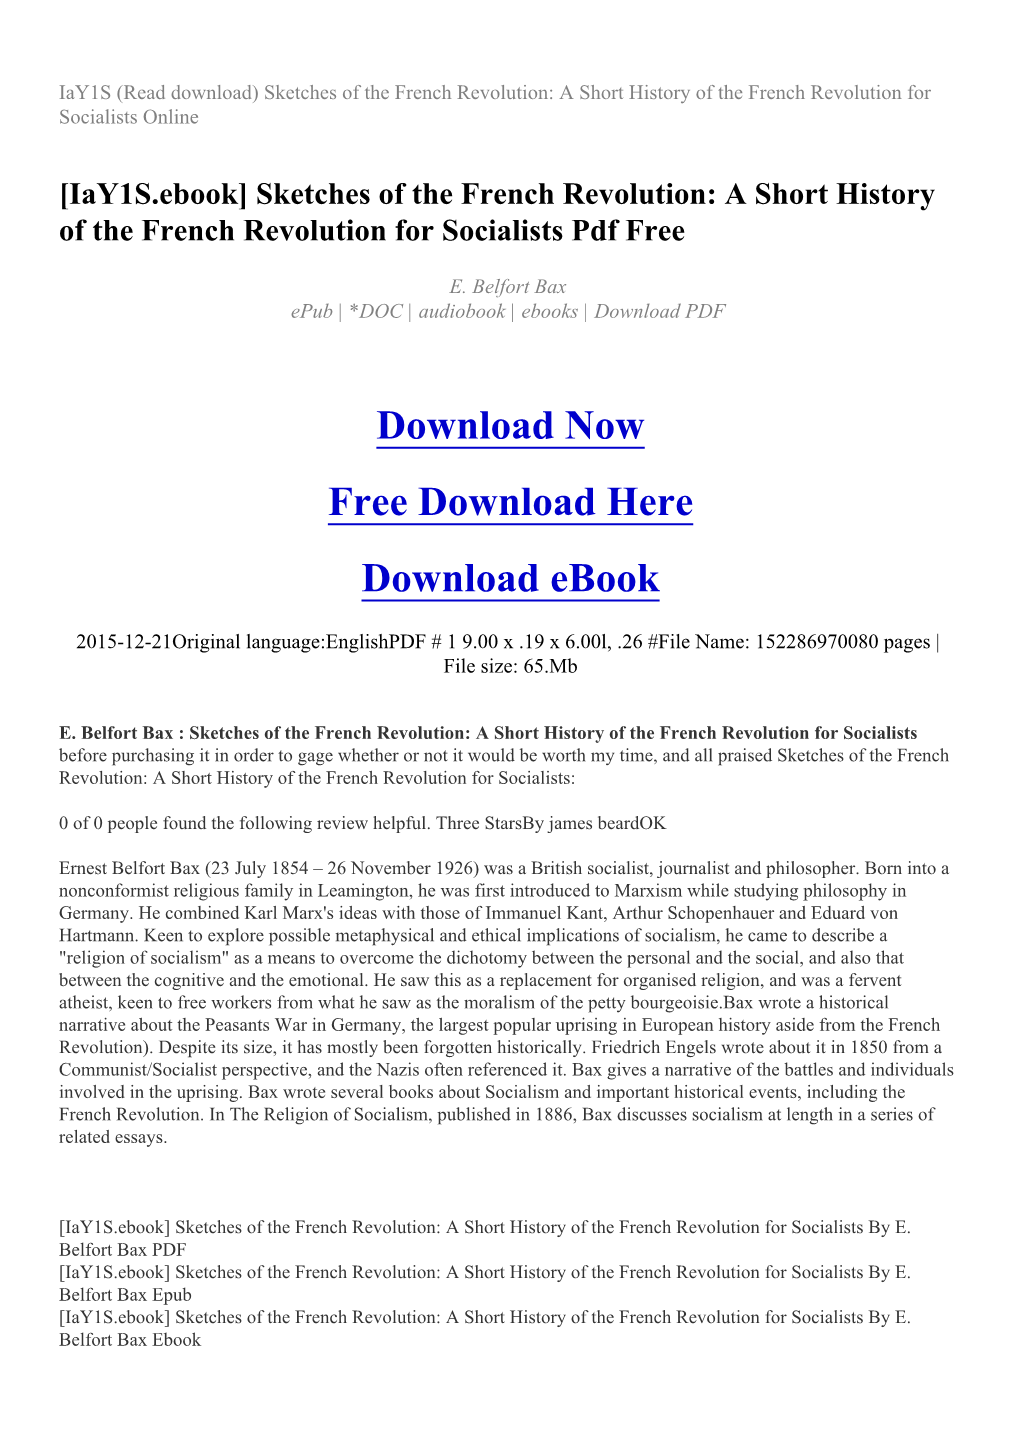 Sketches of the French Revolution: a Short History of the French Revolution for Socialists Online